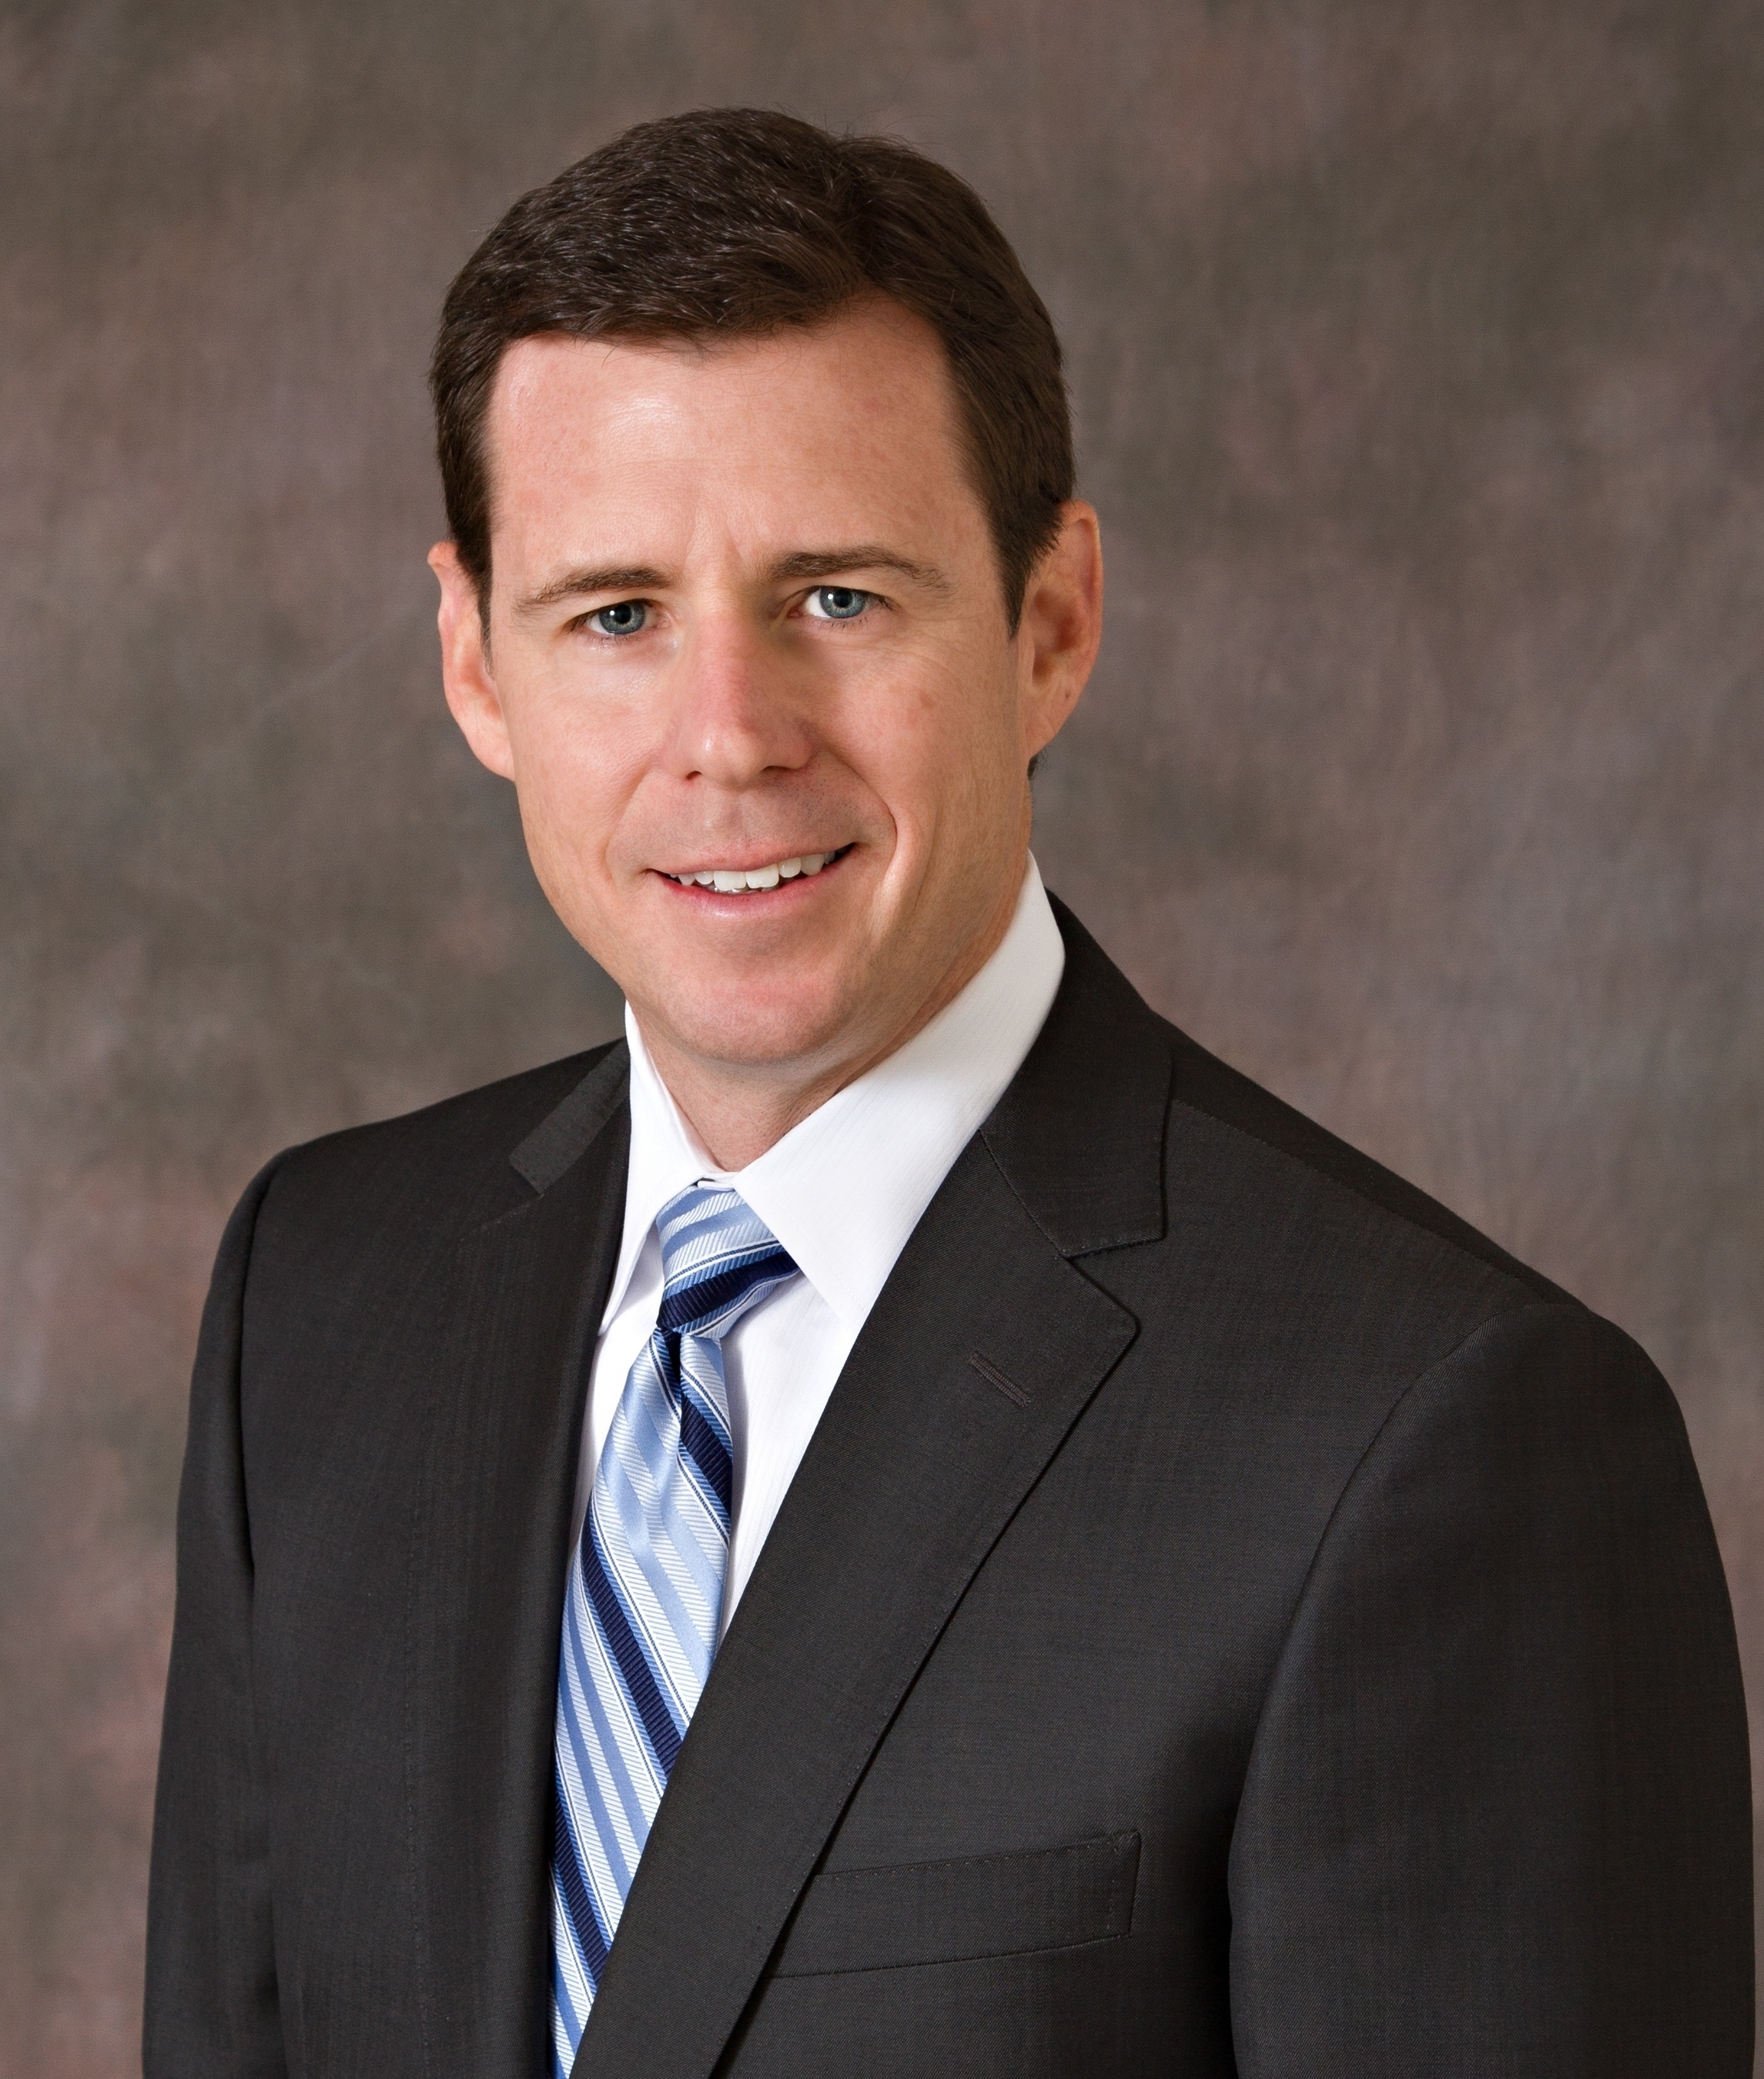 Dion Flannery appointed president of PSA. (PRNewsFoto/PSA Airlines, Inc.)